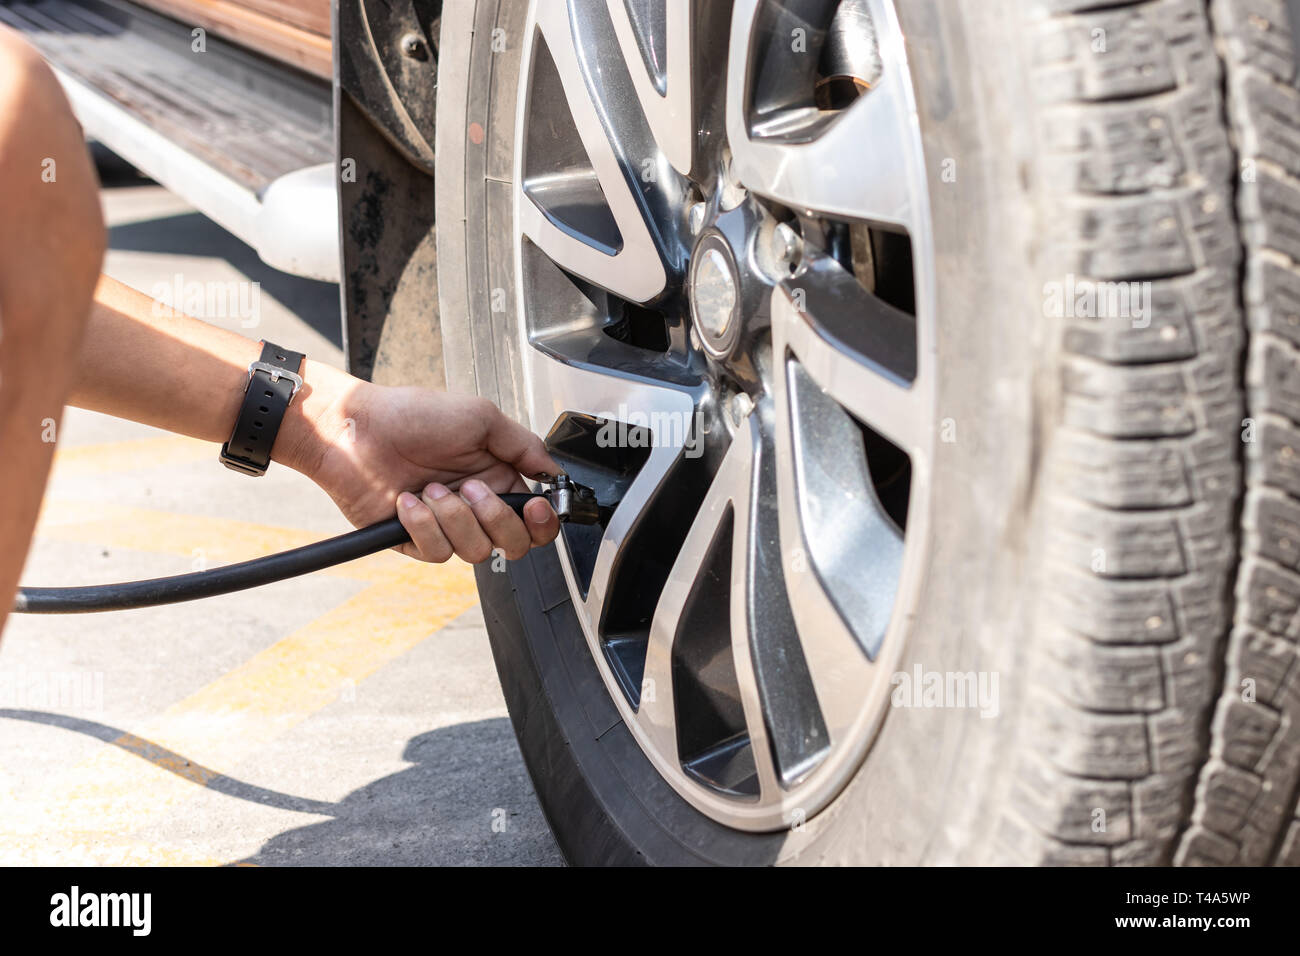 Fitting Cap To Air Valve On Car Tyre Stock Photo - Download Image